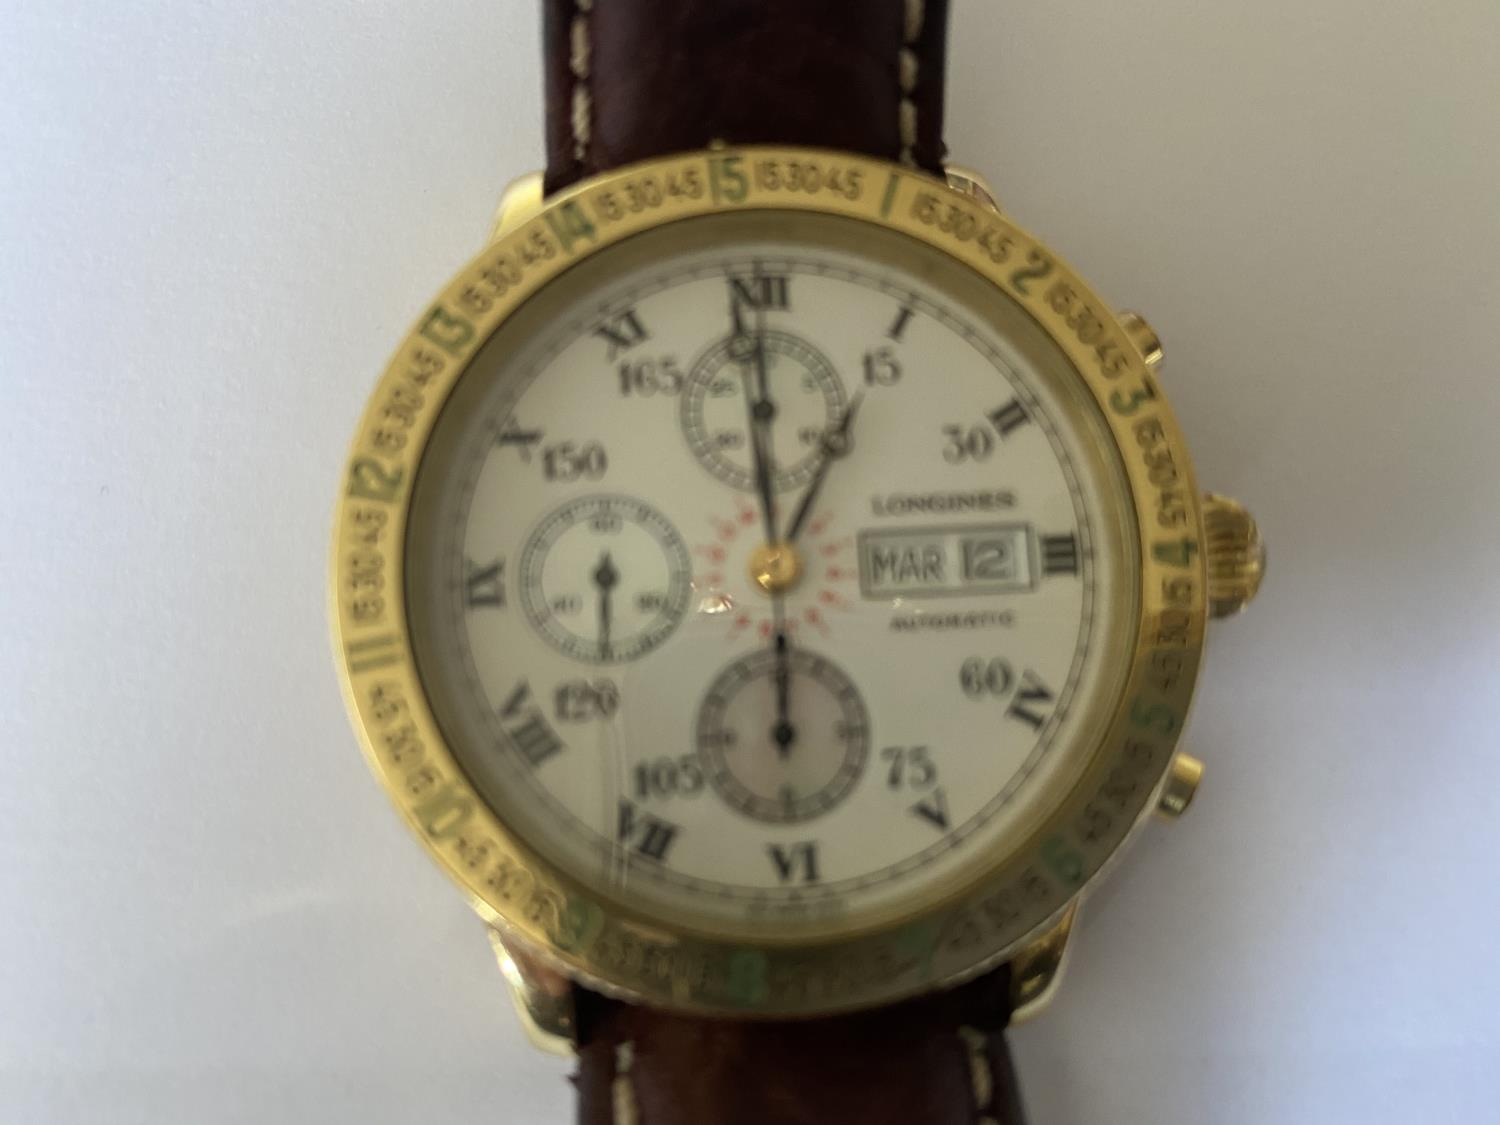 A LONGINES LINDEBERGH HOUR ANGLE WRIST WATCH WITH SOLID YELLOW GOLD CASE AND BEZEL, AUTOMATIC - Image 3 of 12